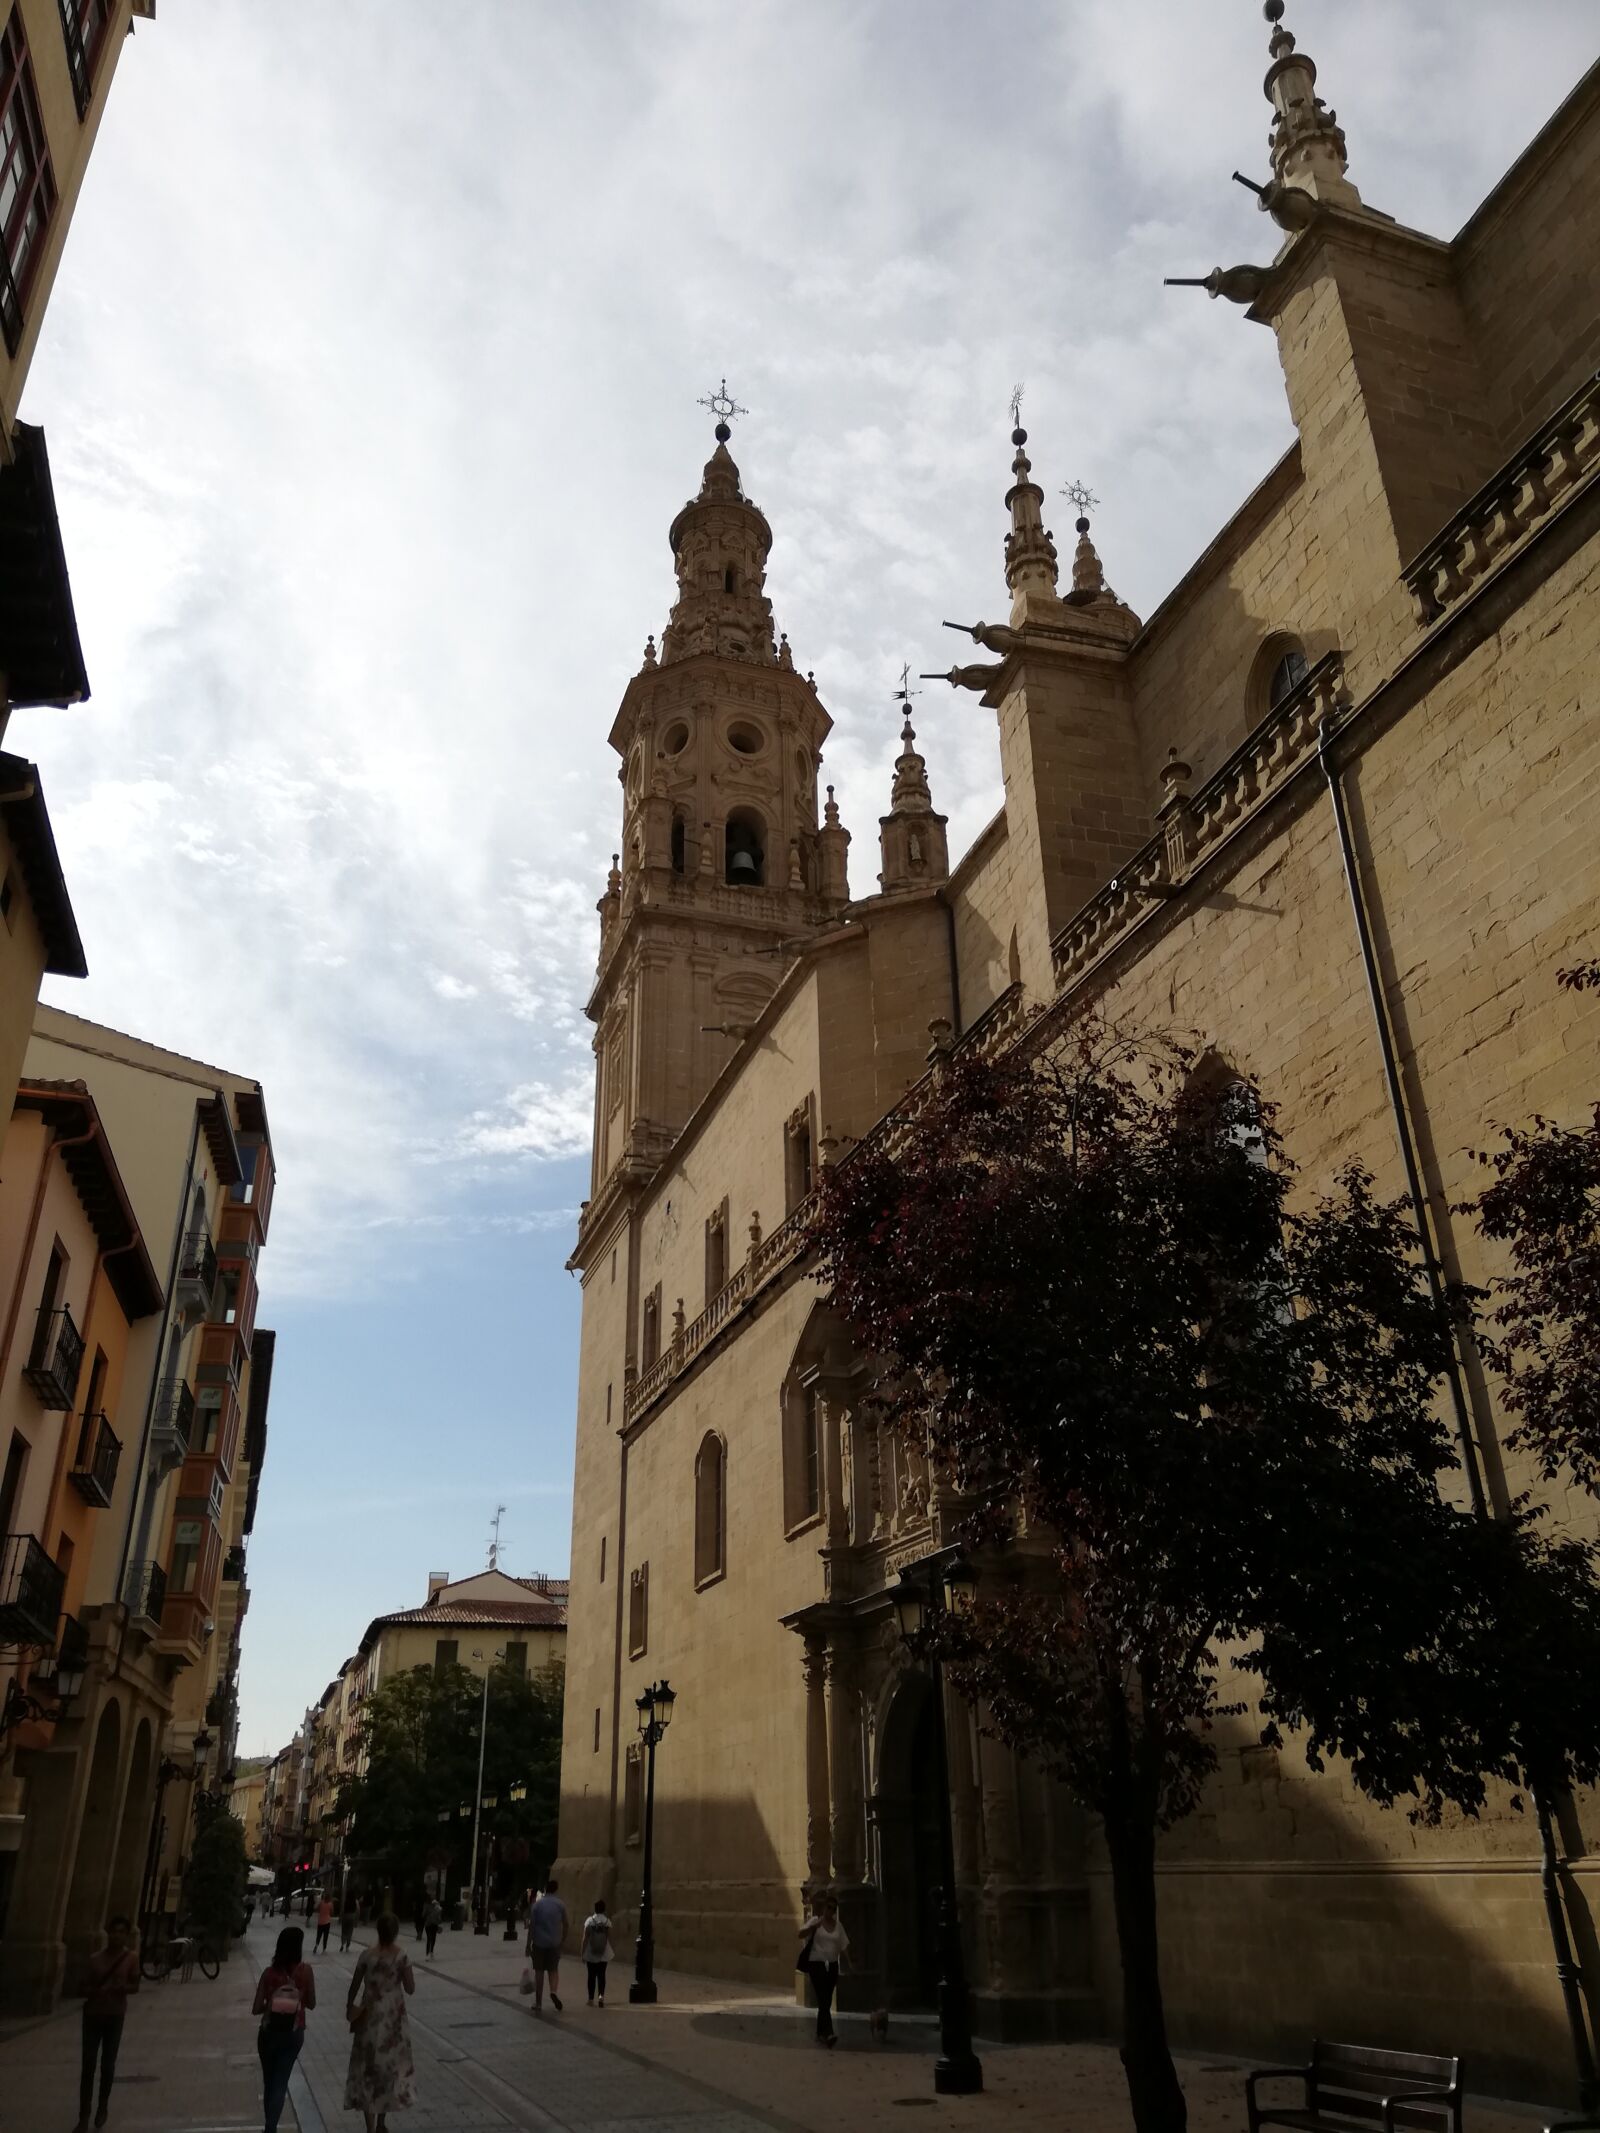 HUAWEI P20 lite sample photo. Spain, church, architecture photography